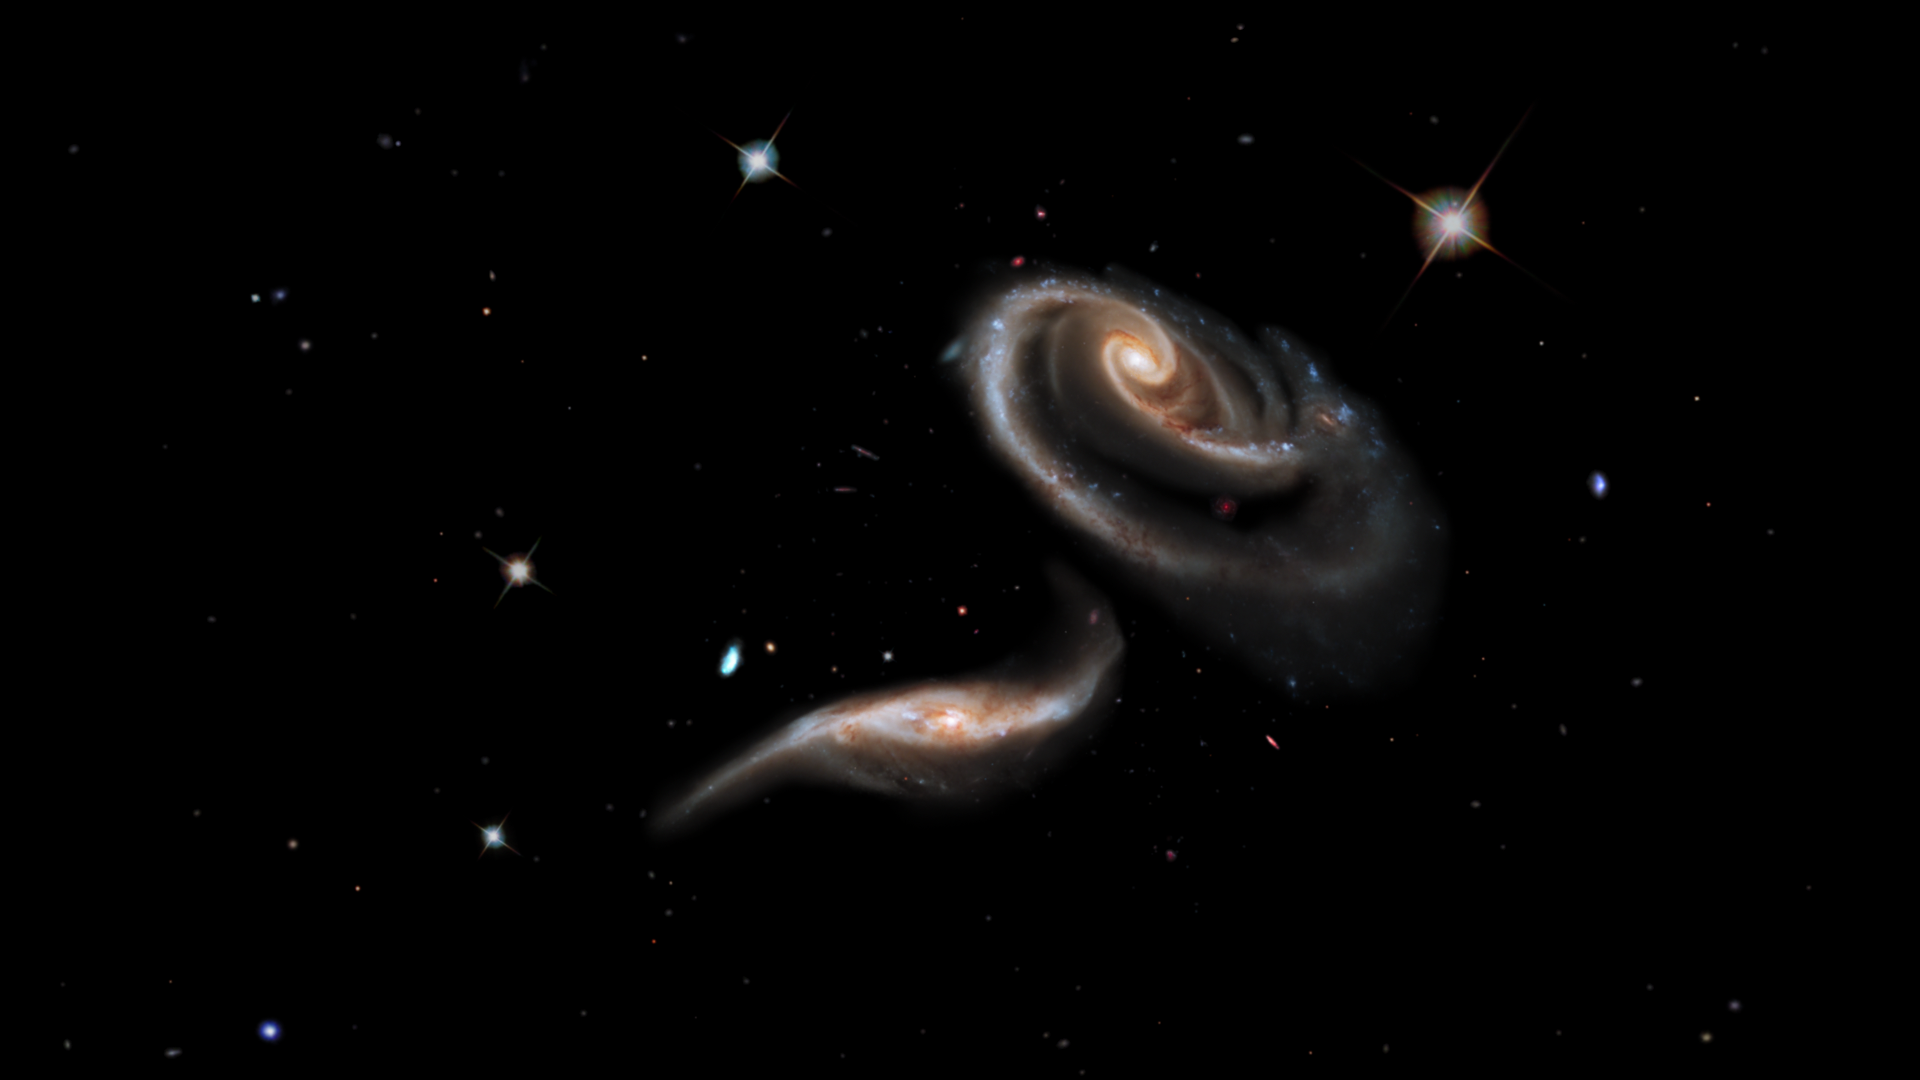 Known as Arp 273, these two galaxies have been distorted by their mutual gravitaional pull into a shape resembling a long-stemmed rose.